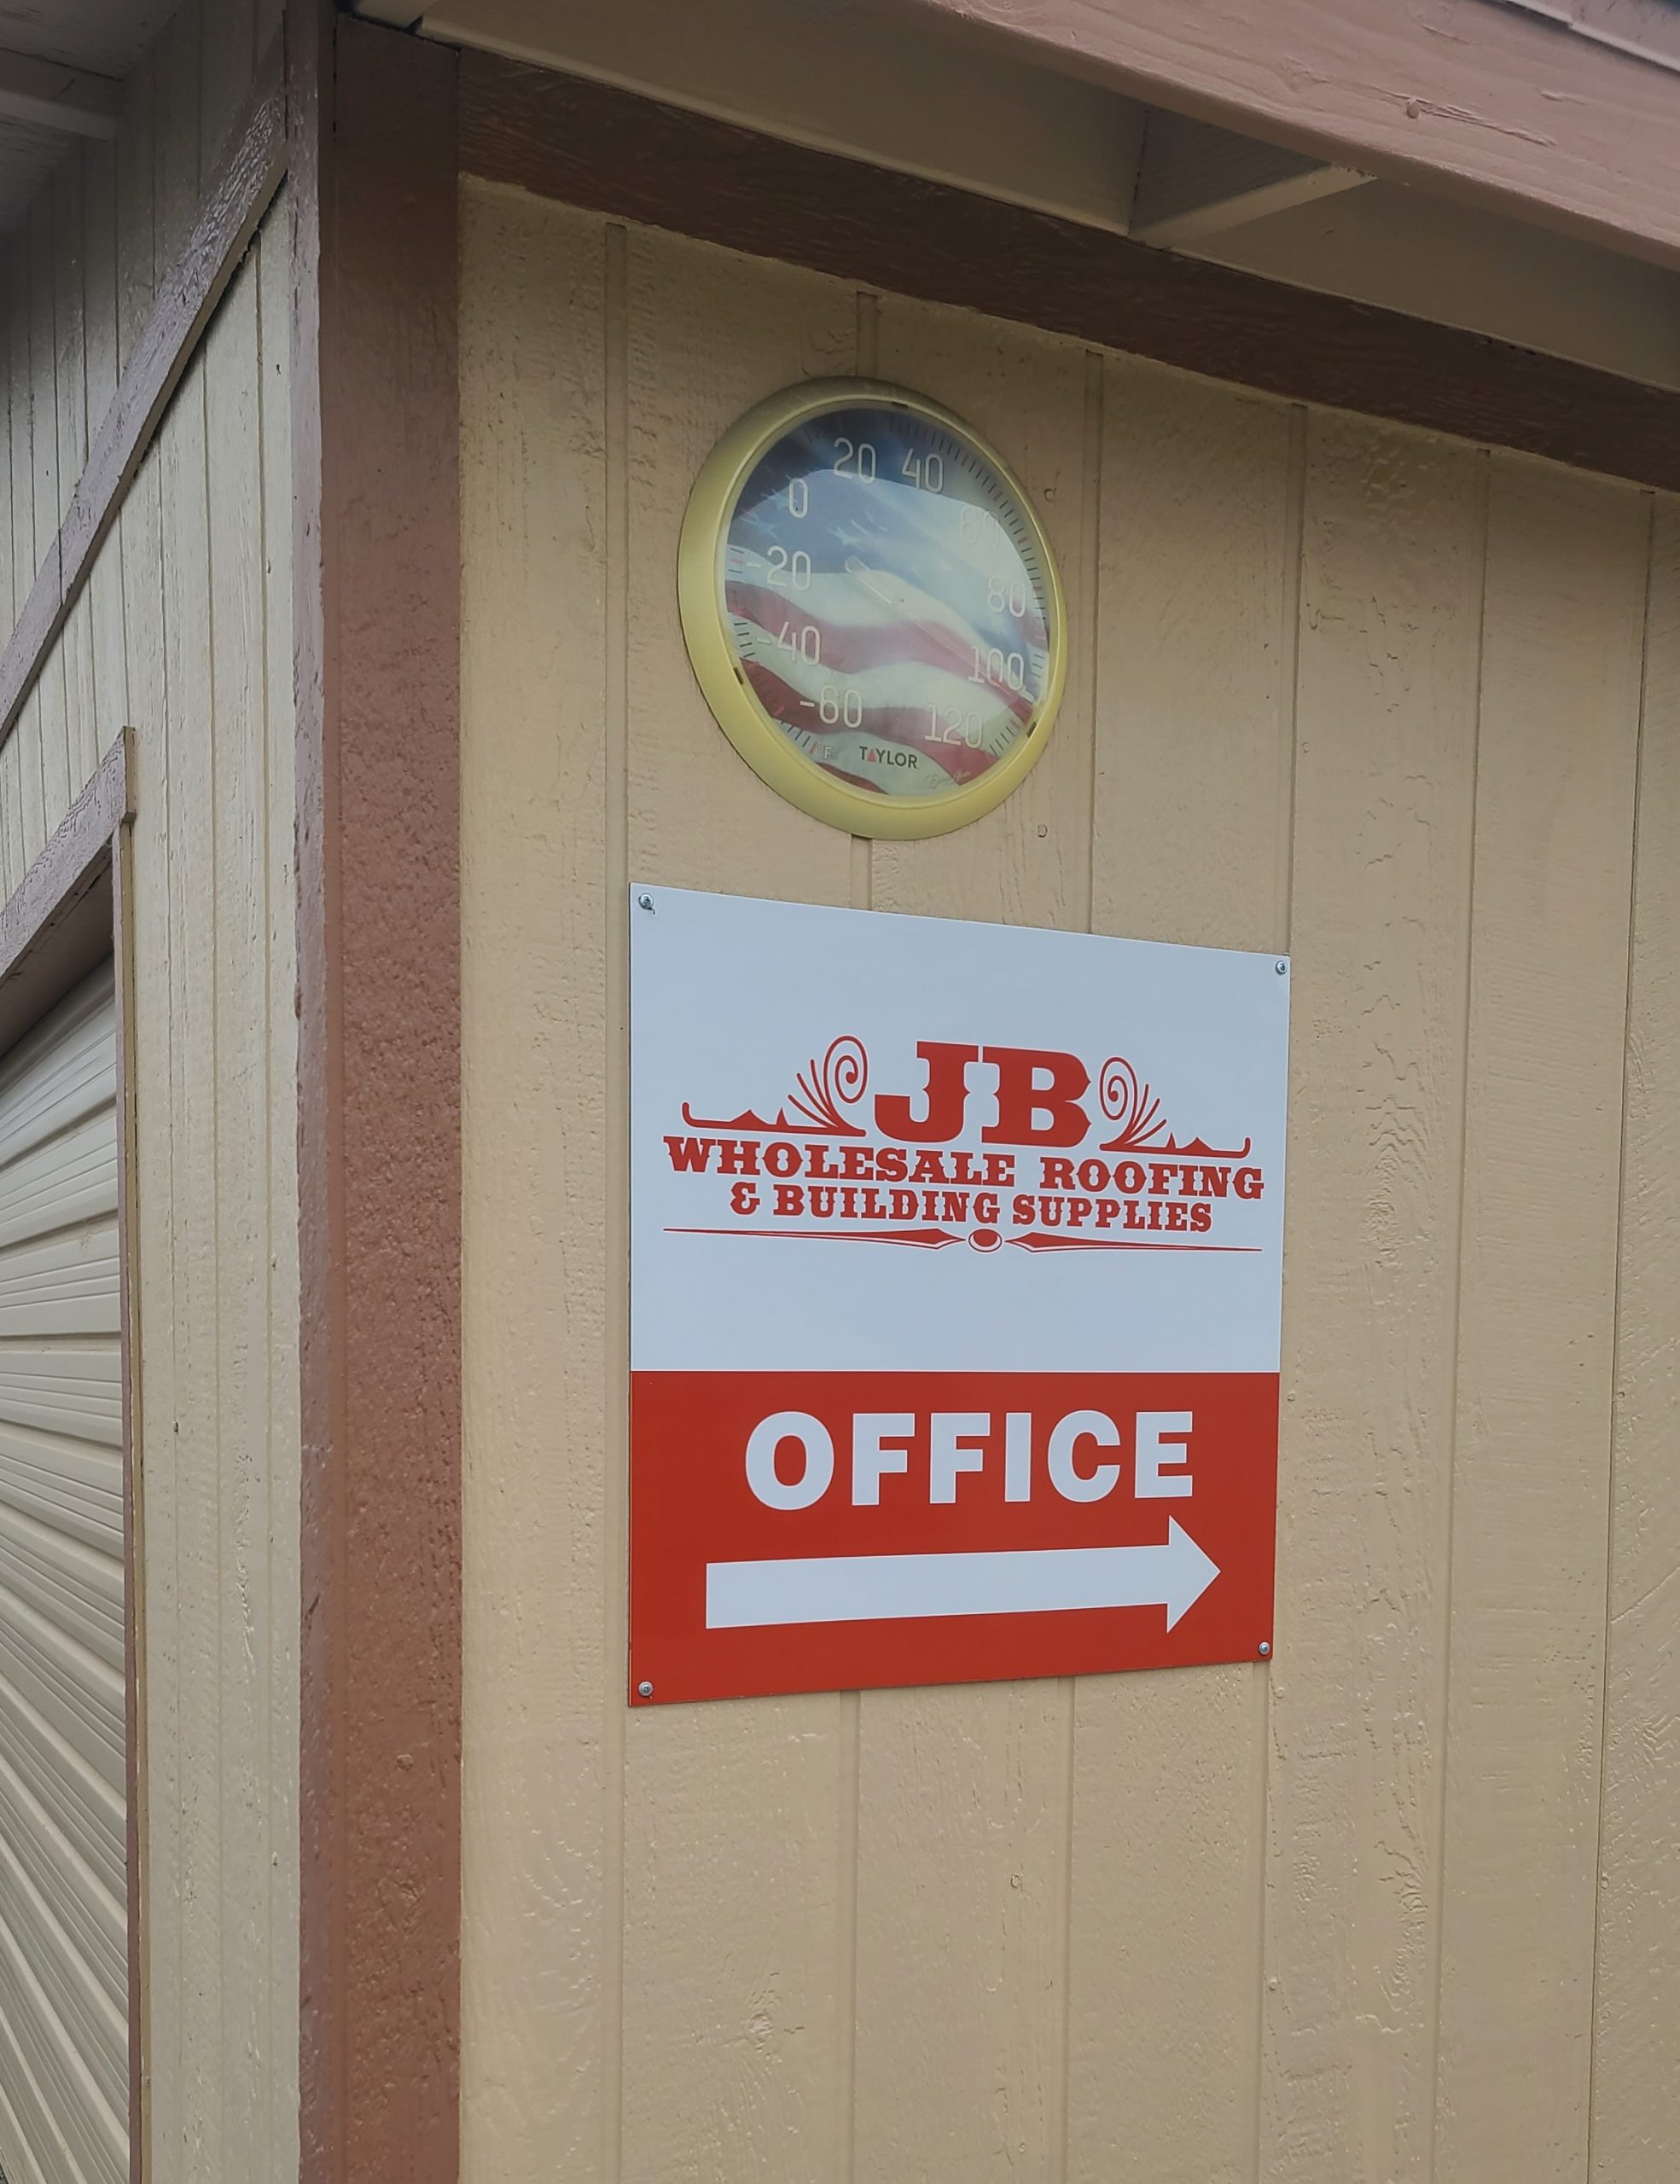 You are currently viewing Outdoor Directional Sign for JB Wholesale Roofing in Murrieta